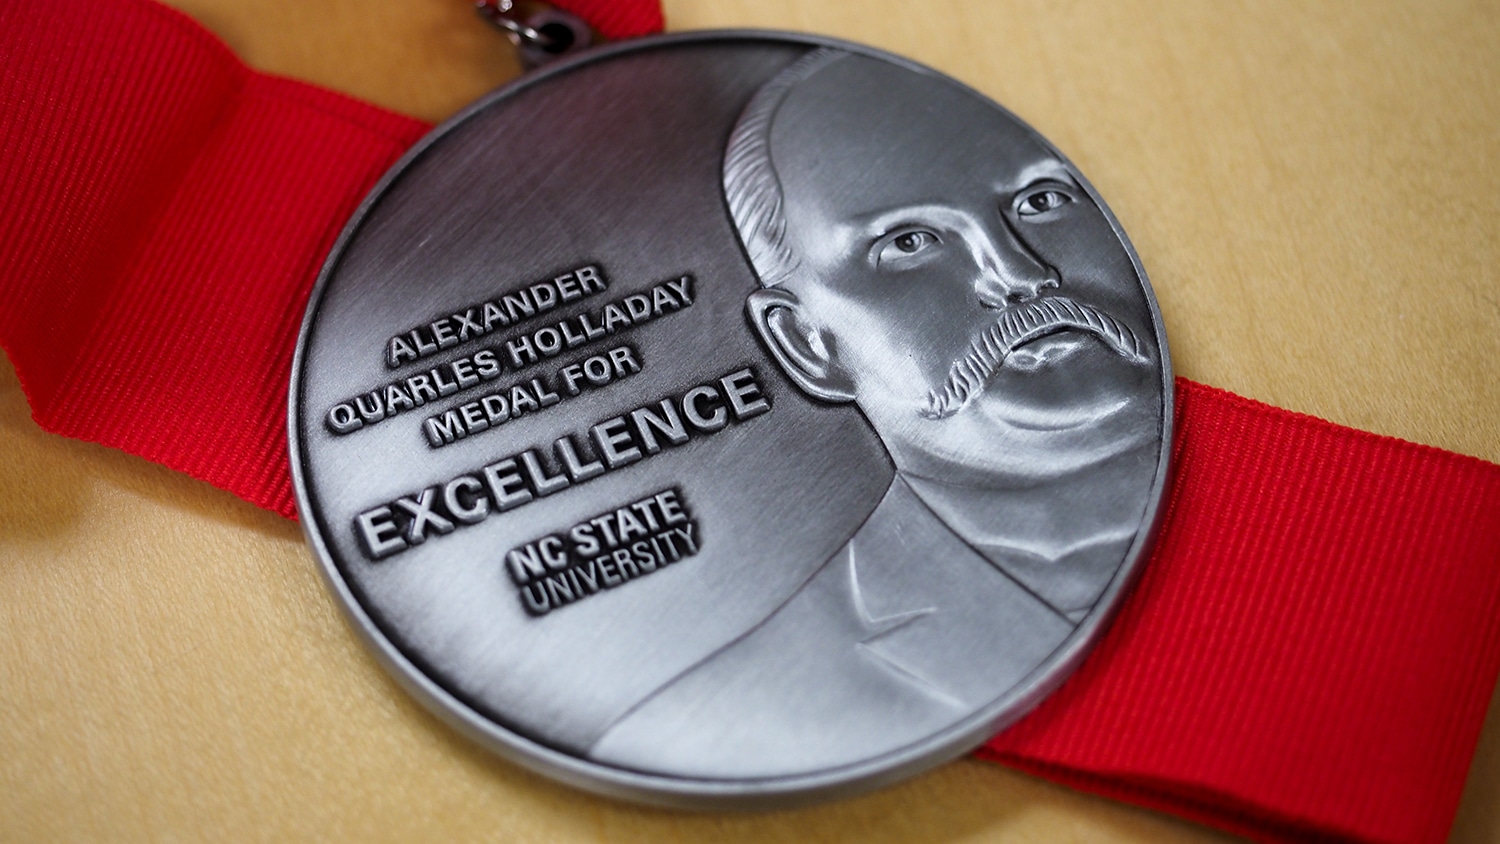 The Alexander Quarles Holladay Medal for Excellence